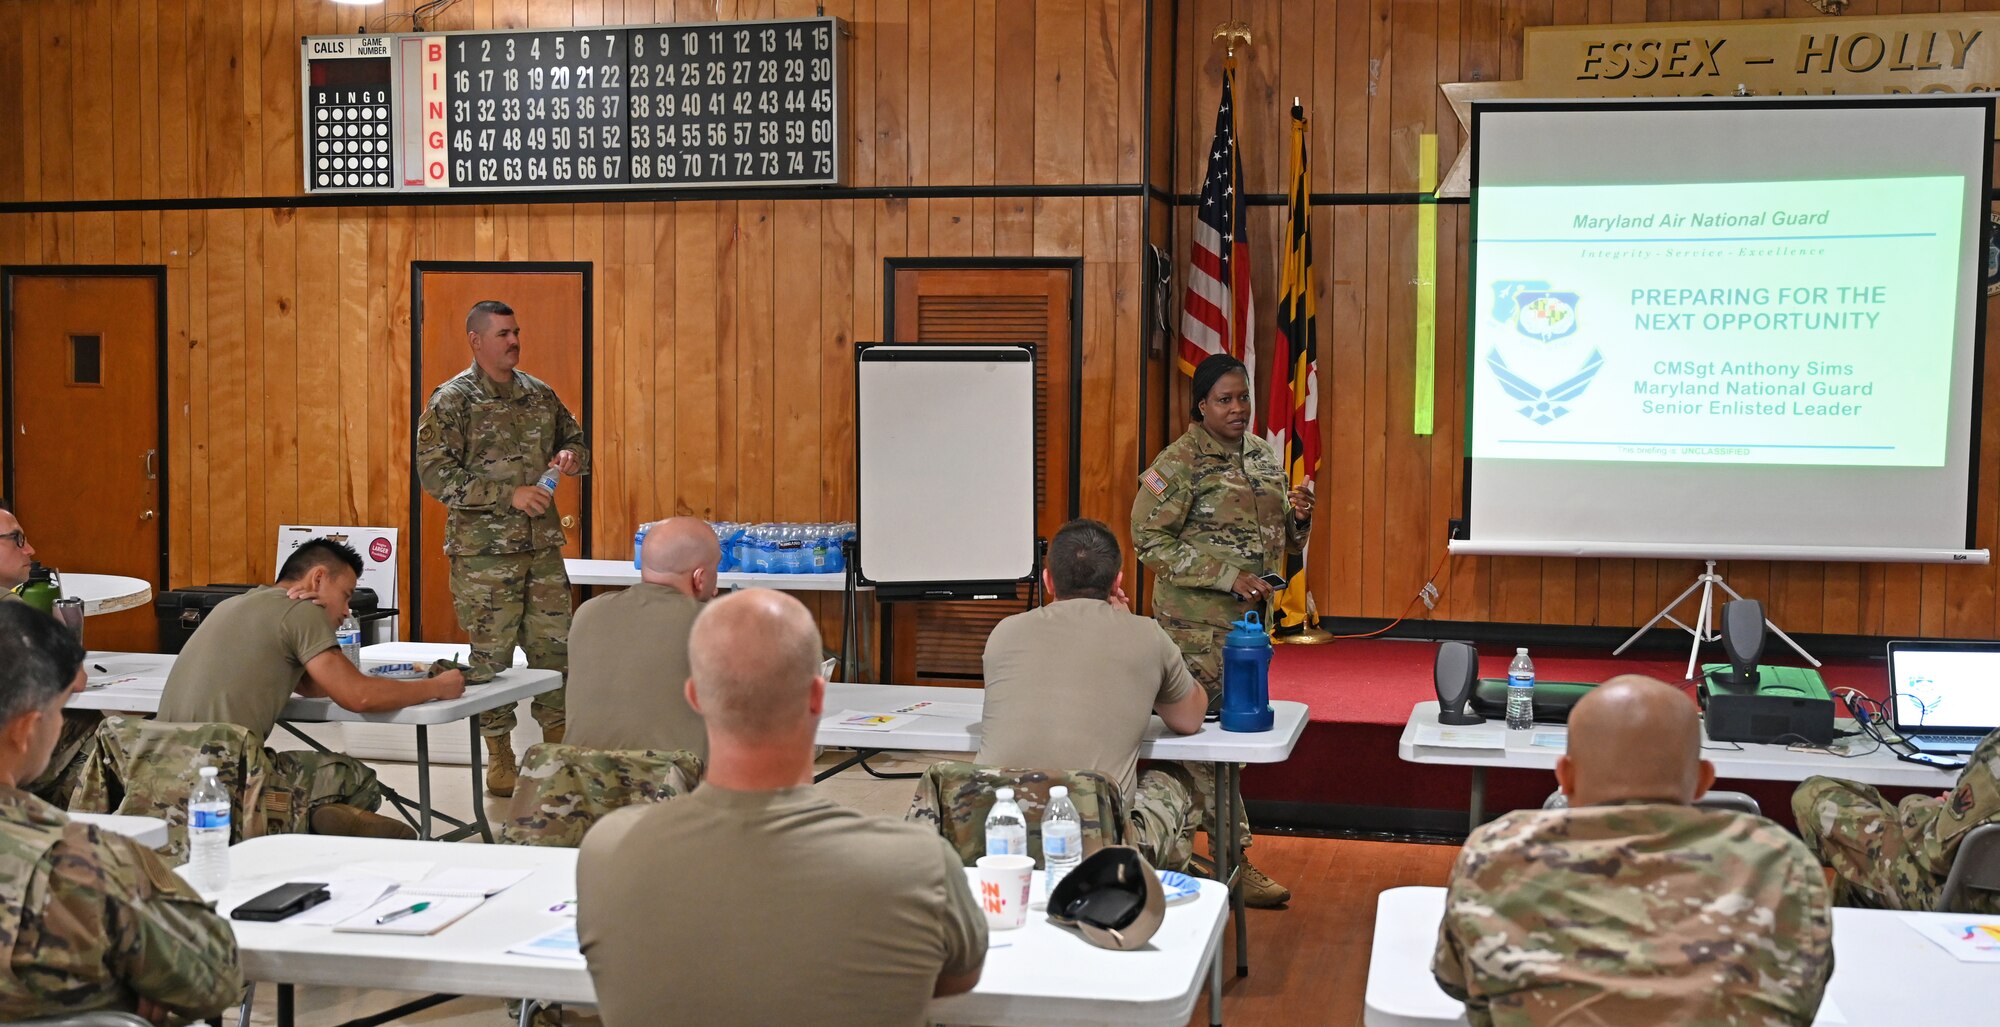 U.S. Army Command Sgt. Maj. Perlisa Wilson, Maryland National Guard senior enlisted leader, speaks with Maryland Air National Guard Airmen at the Chief Master Sergeant's Professional Development Course at the Veterans of Foreign Wars Post 2621 in Essex, Maryland, August 4, 2022. Wilson currently serves as the Maryland National Guard senior enlisted leader and will relinquish her role on August 15, 2022. (U.S. Air National Guard photo by Master Sgt. Chris Schepers)